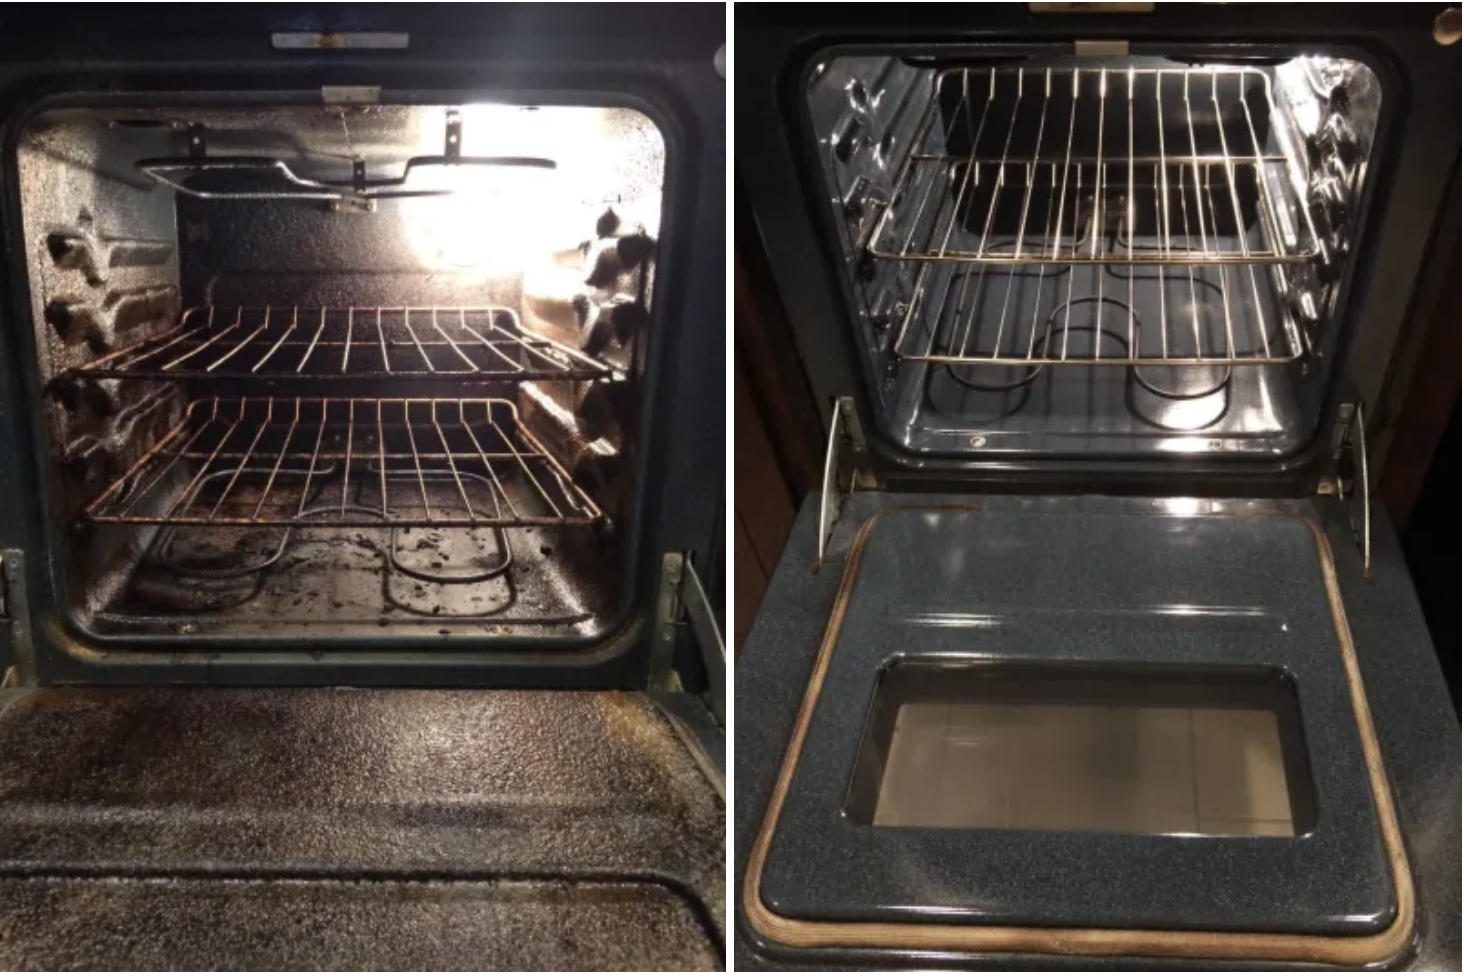 Left: A reviewer&#x27;s dirty oven with baked-on residue / right: The same oven, but completely clean and shiny